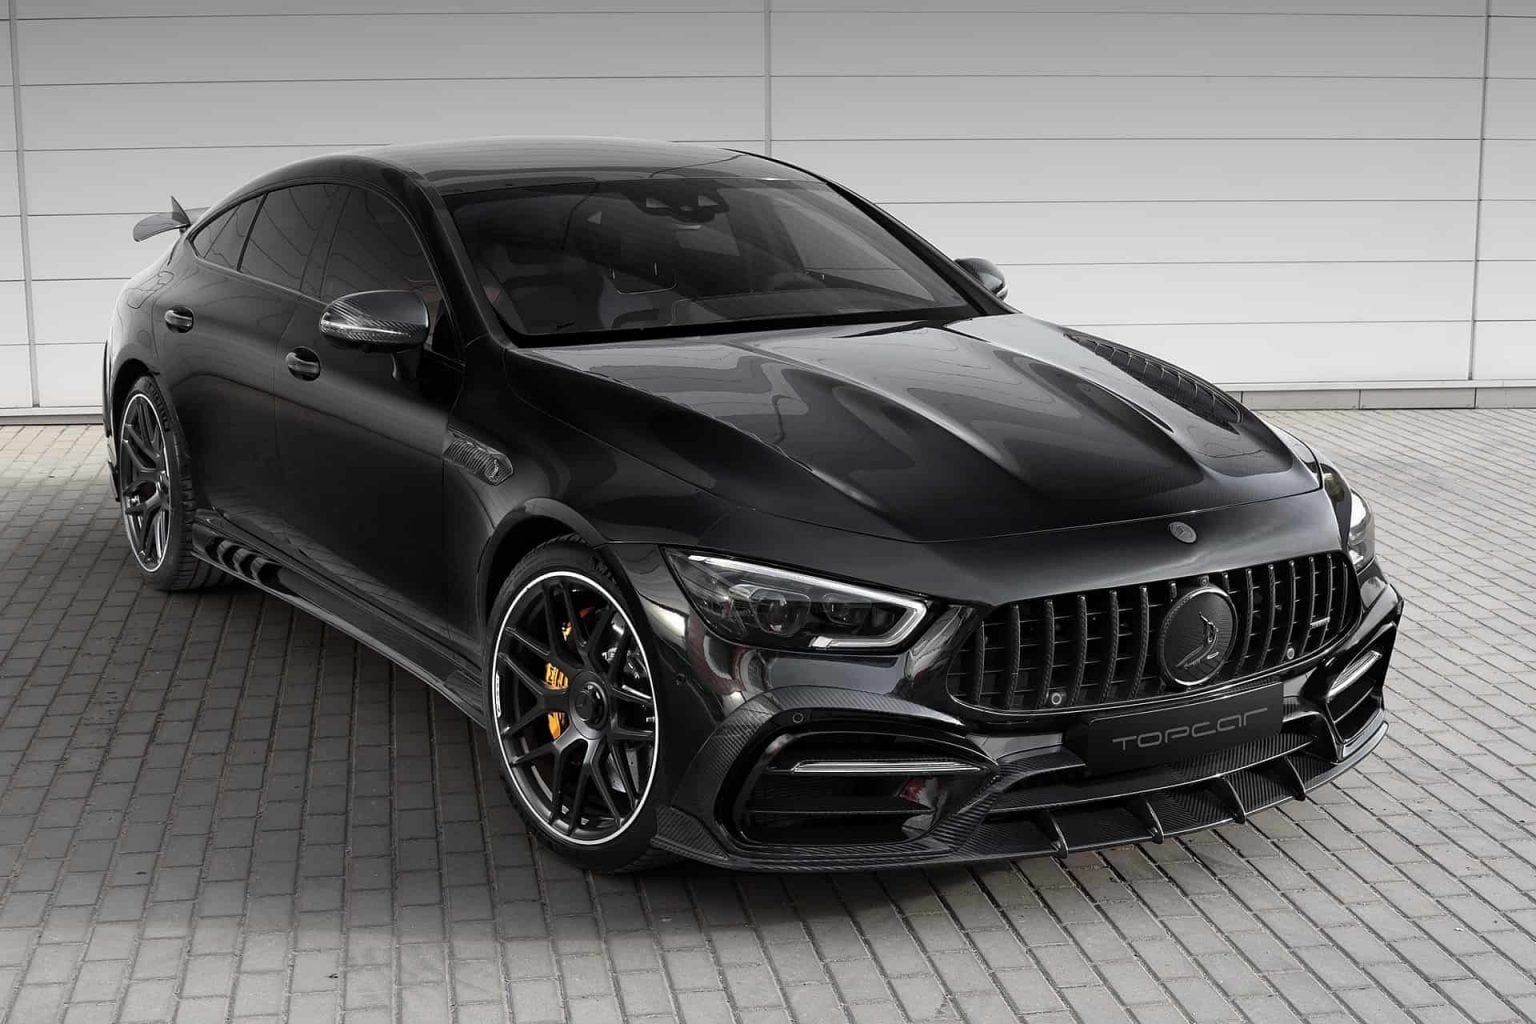 Mercedes Amg Gt 4 Door Coupe Body Kit By Topcar 11 Maxtuncars